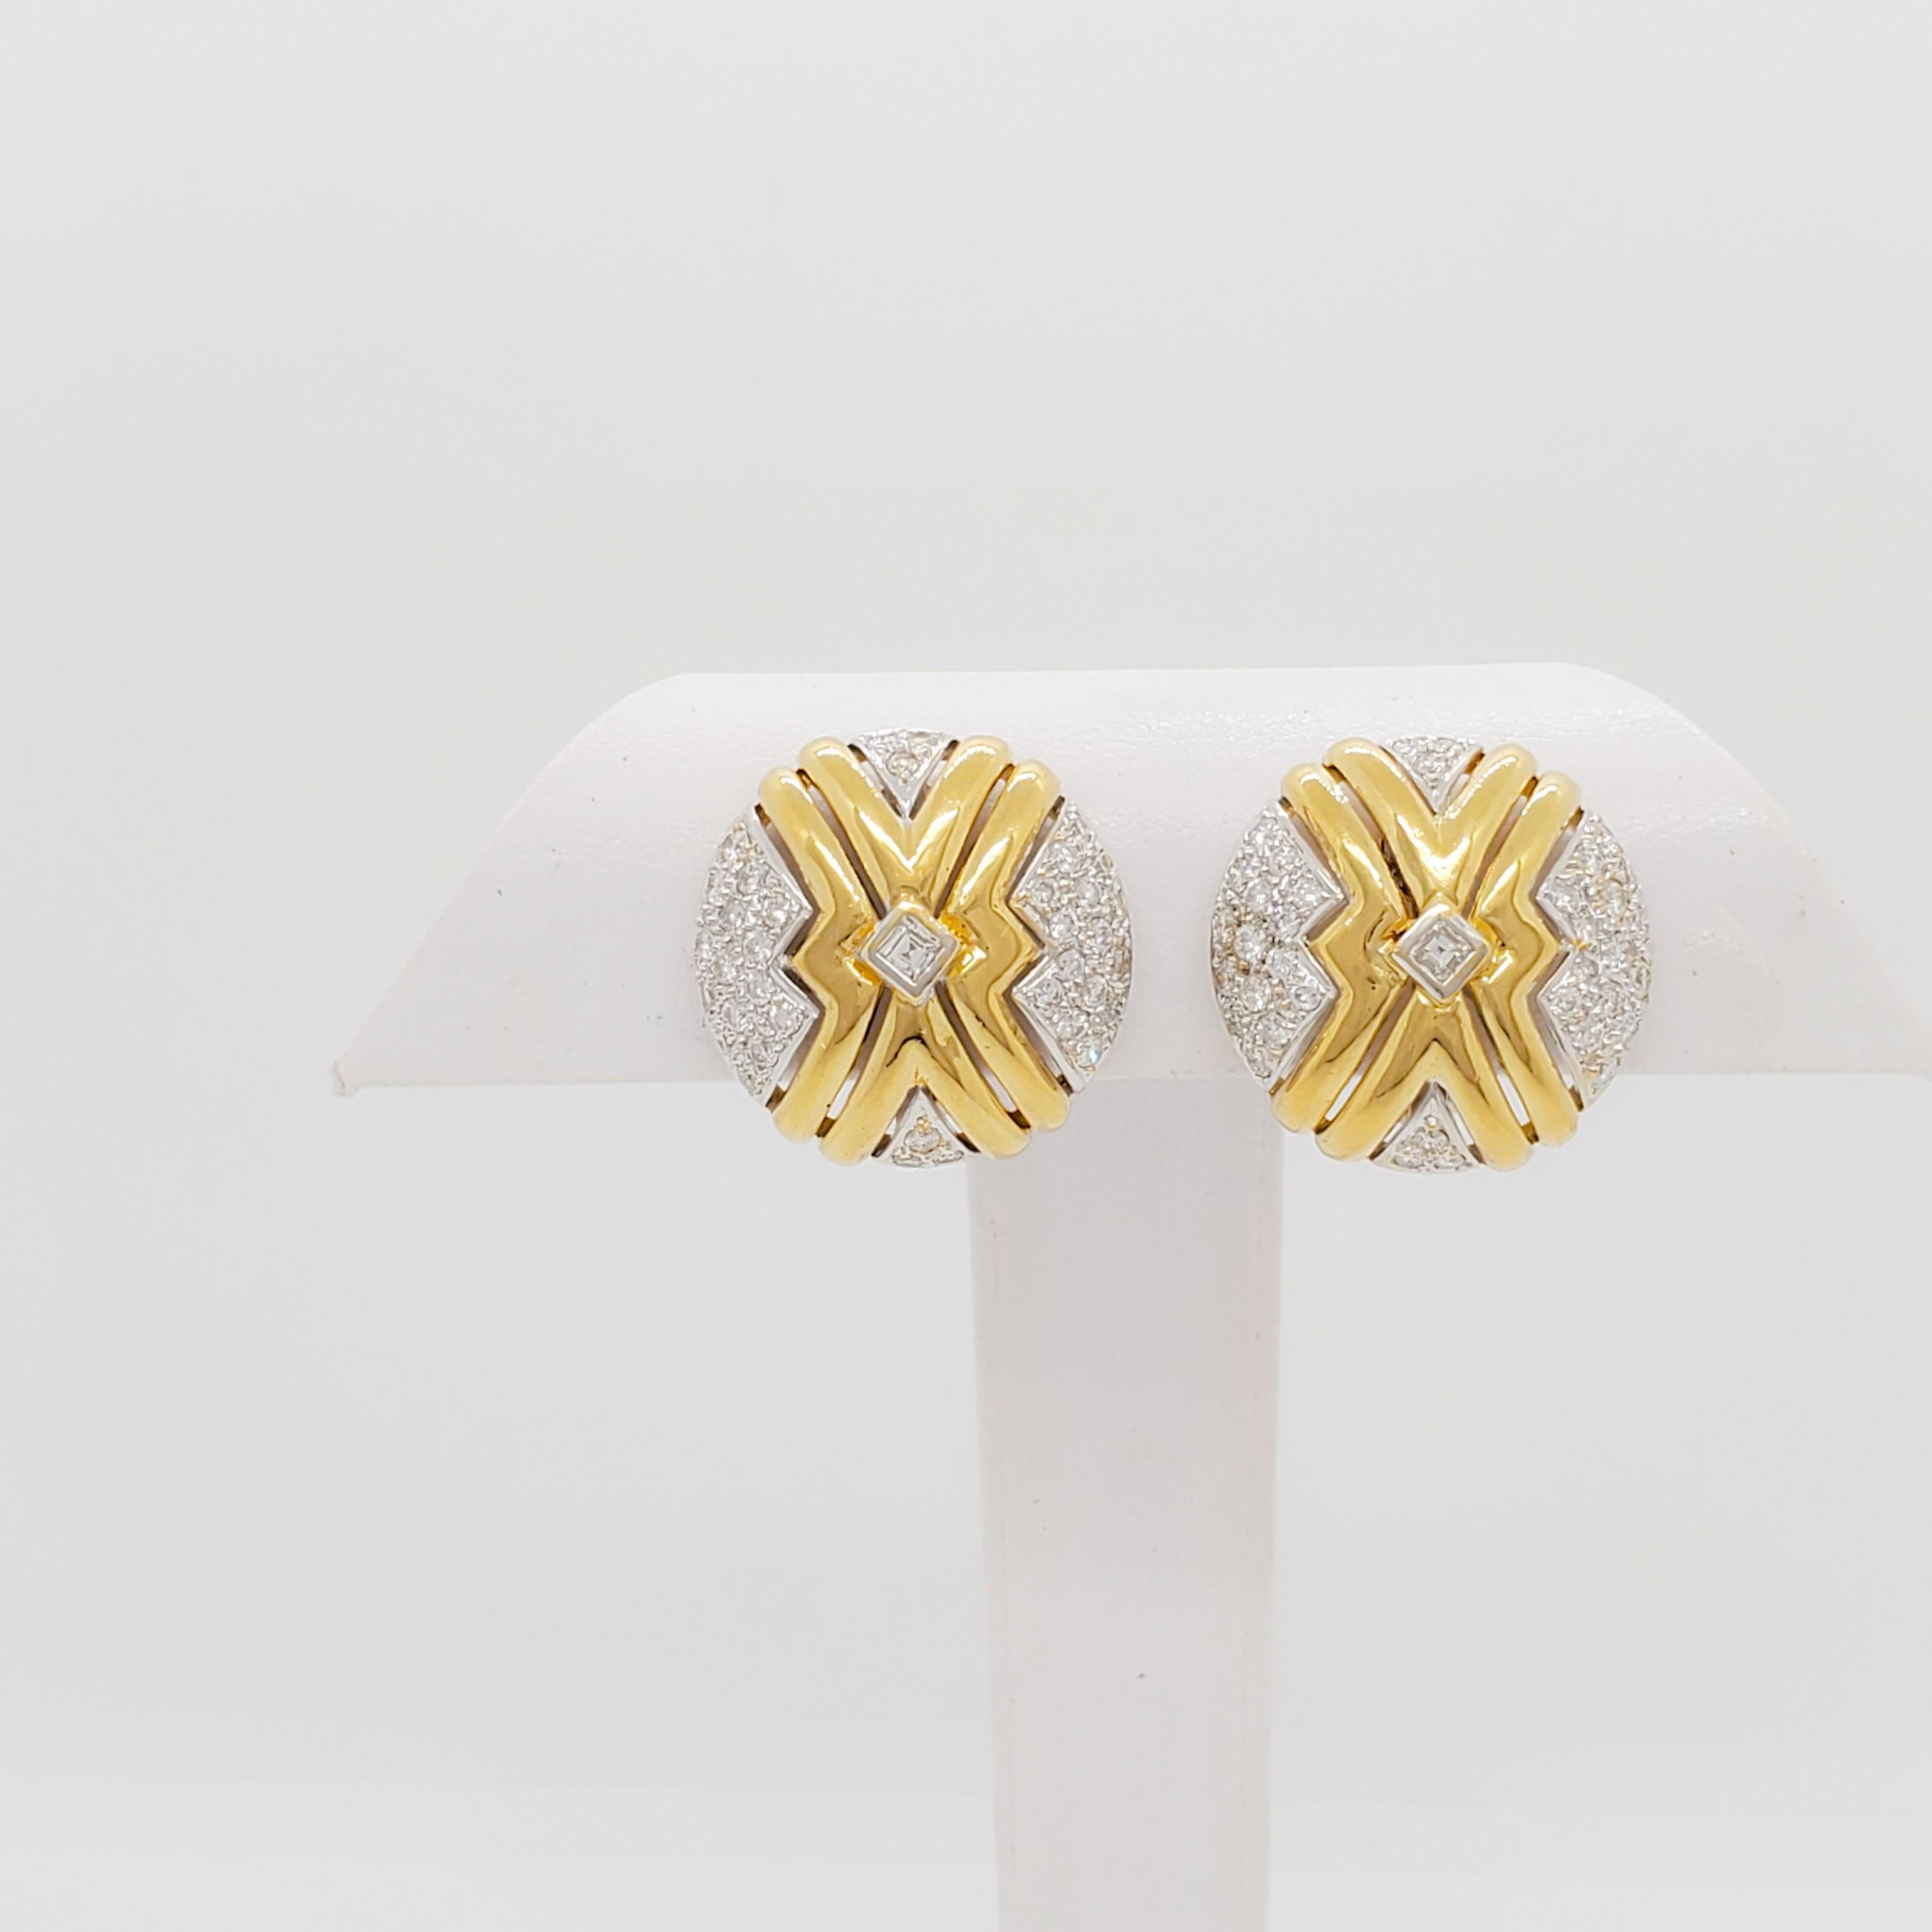 Gorgeous earrings with 1.50 ct. white diamond rounds and squares.  Handmade in 18k yellow and white gold.